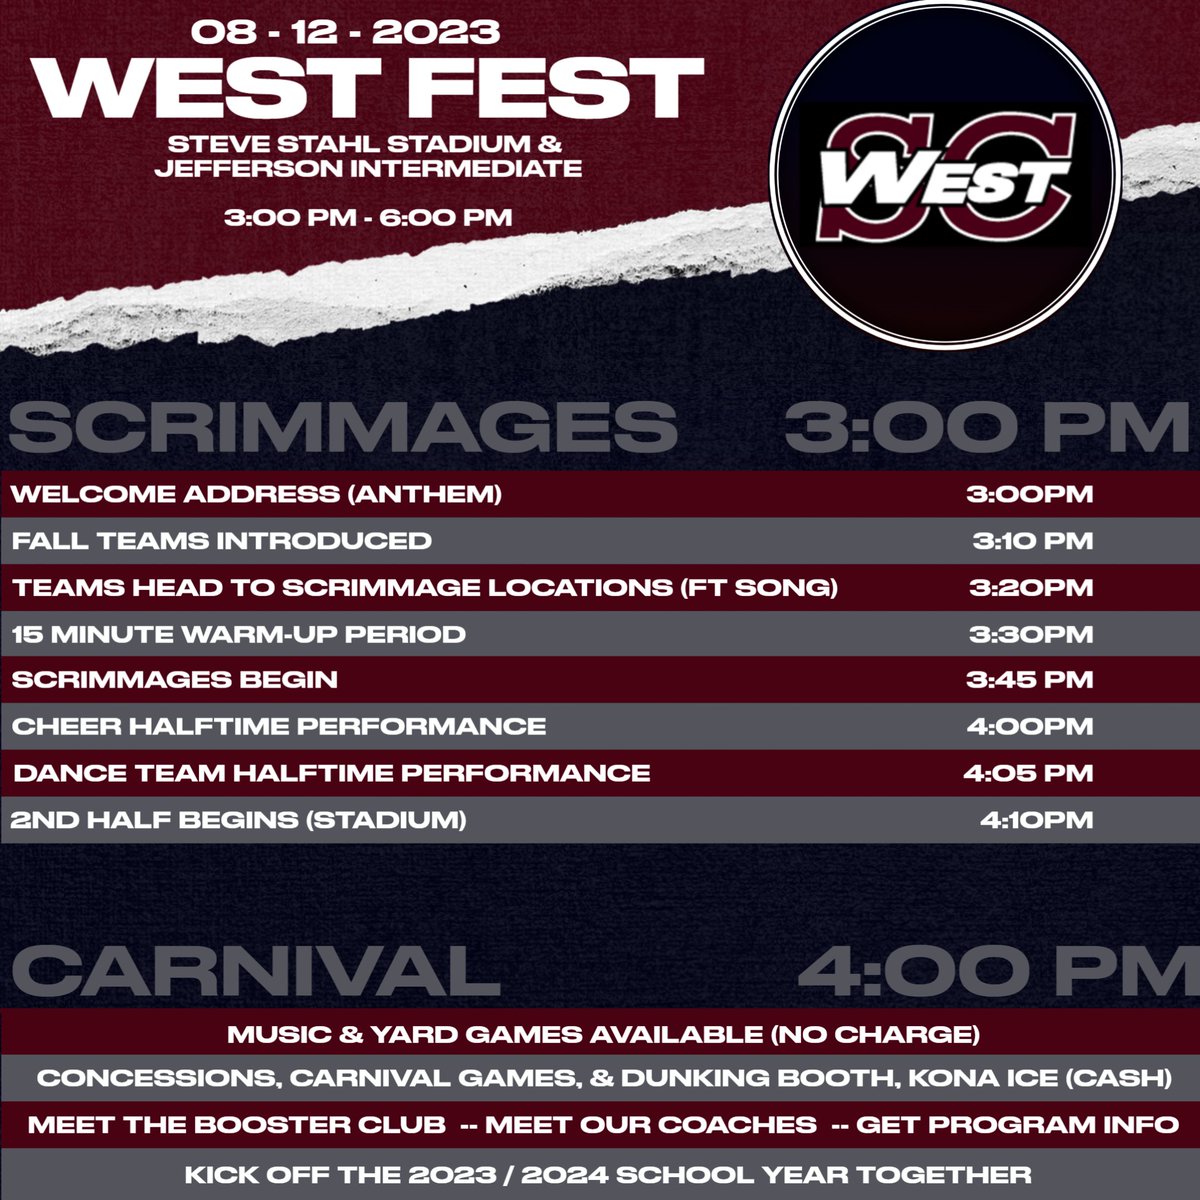 Calling SCSD students of all ages! West Fest is running this Saturday from 3:00 PM - 6:00 PM. Come out and kick off the 23/24 school year with us. Event starts at 3:00 PM in the Stadium.